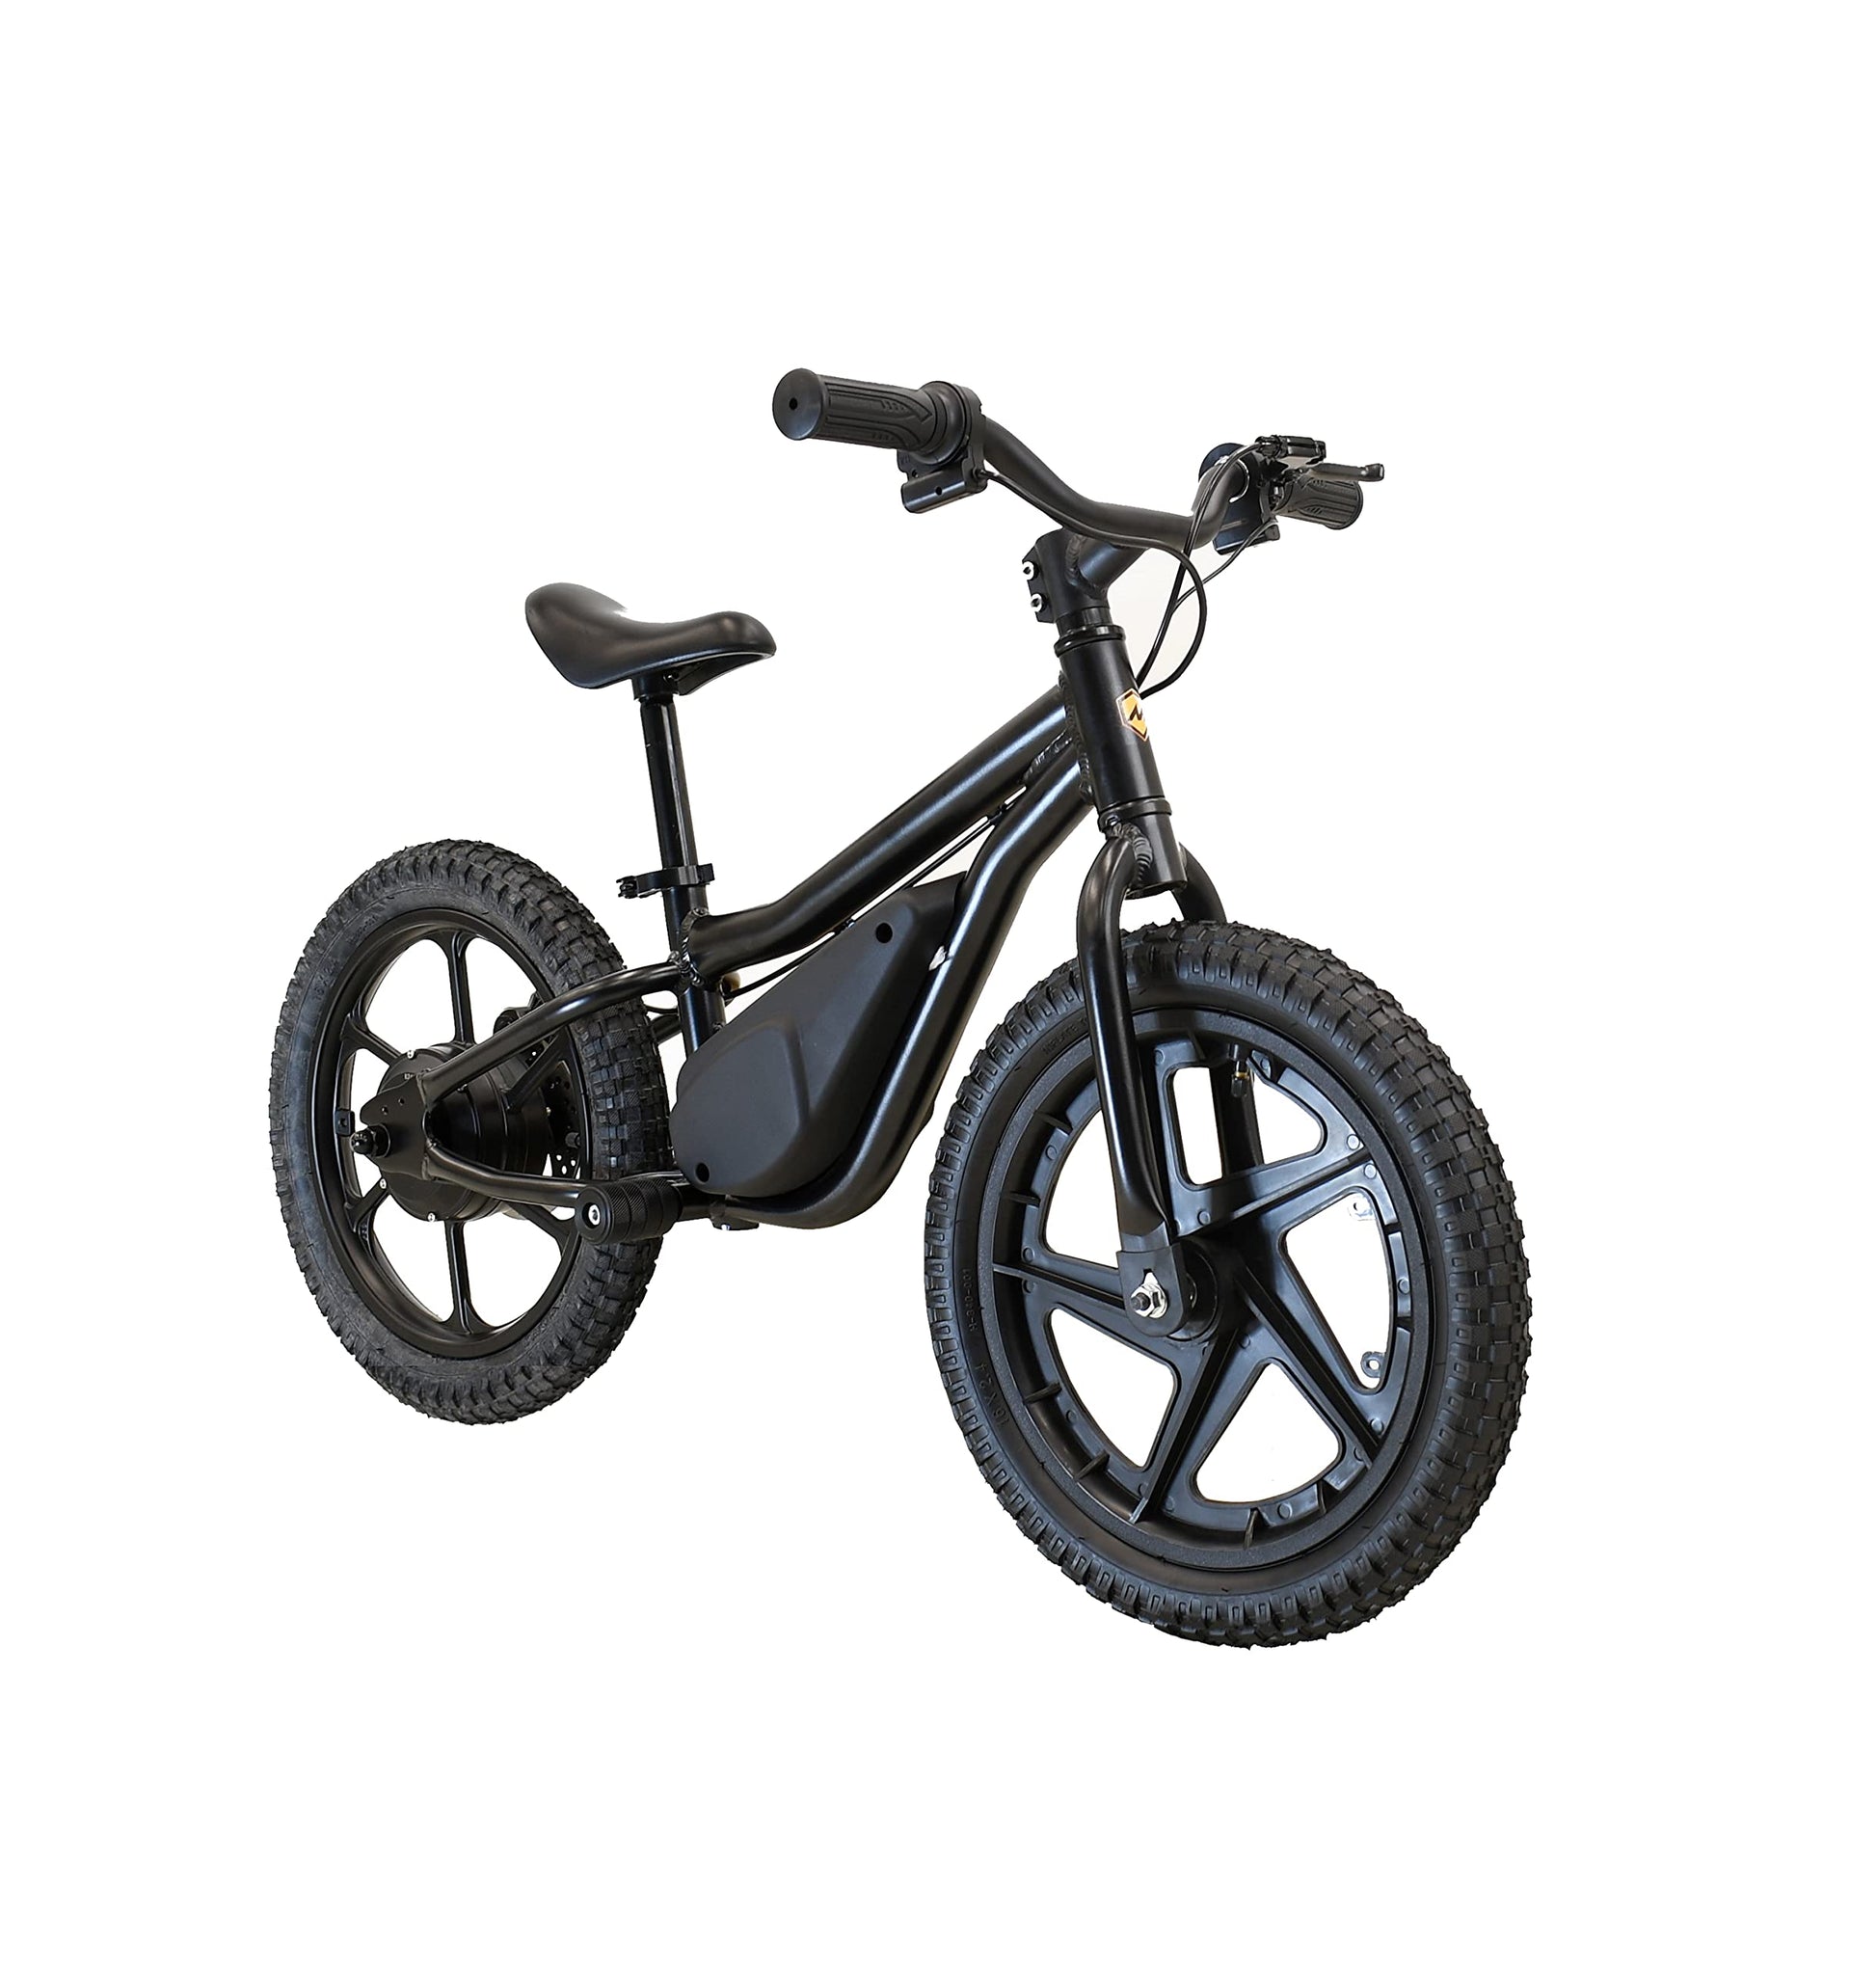 Massimo E16 24V Electric Balance Bike Bicycle Seat Height 18in - 22in Ages 5 & Up (Black) - Home Decor Gifts and More